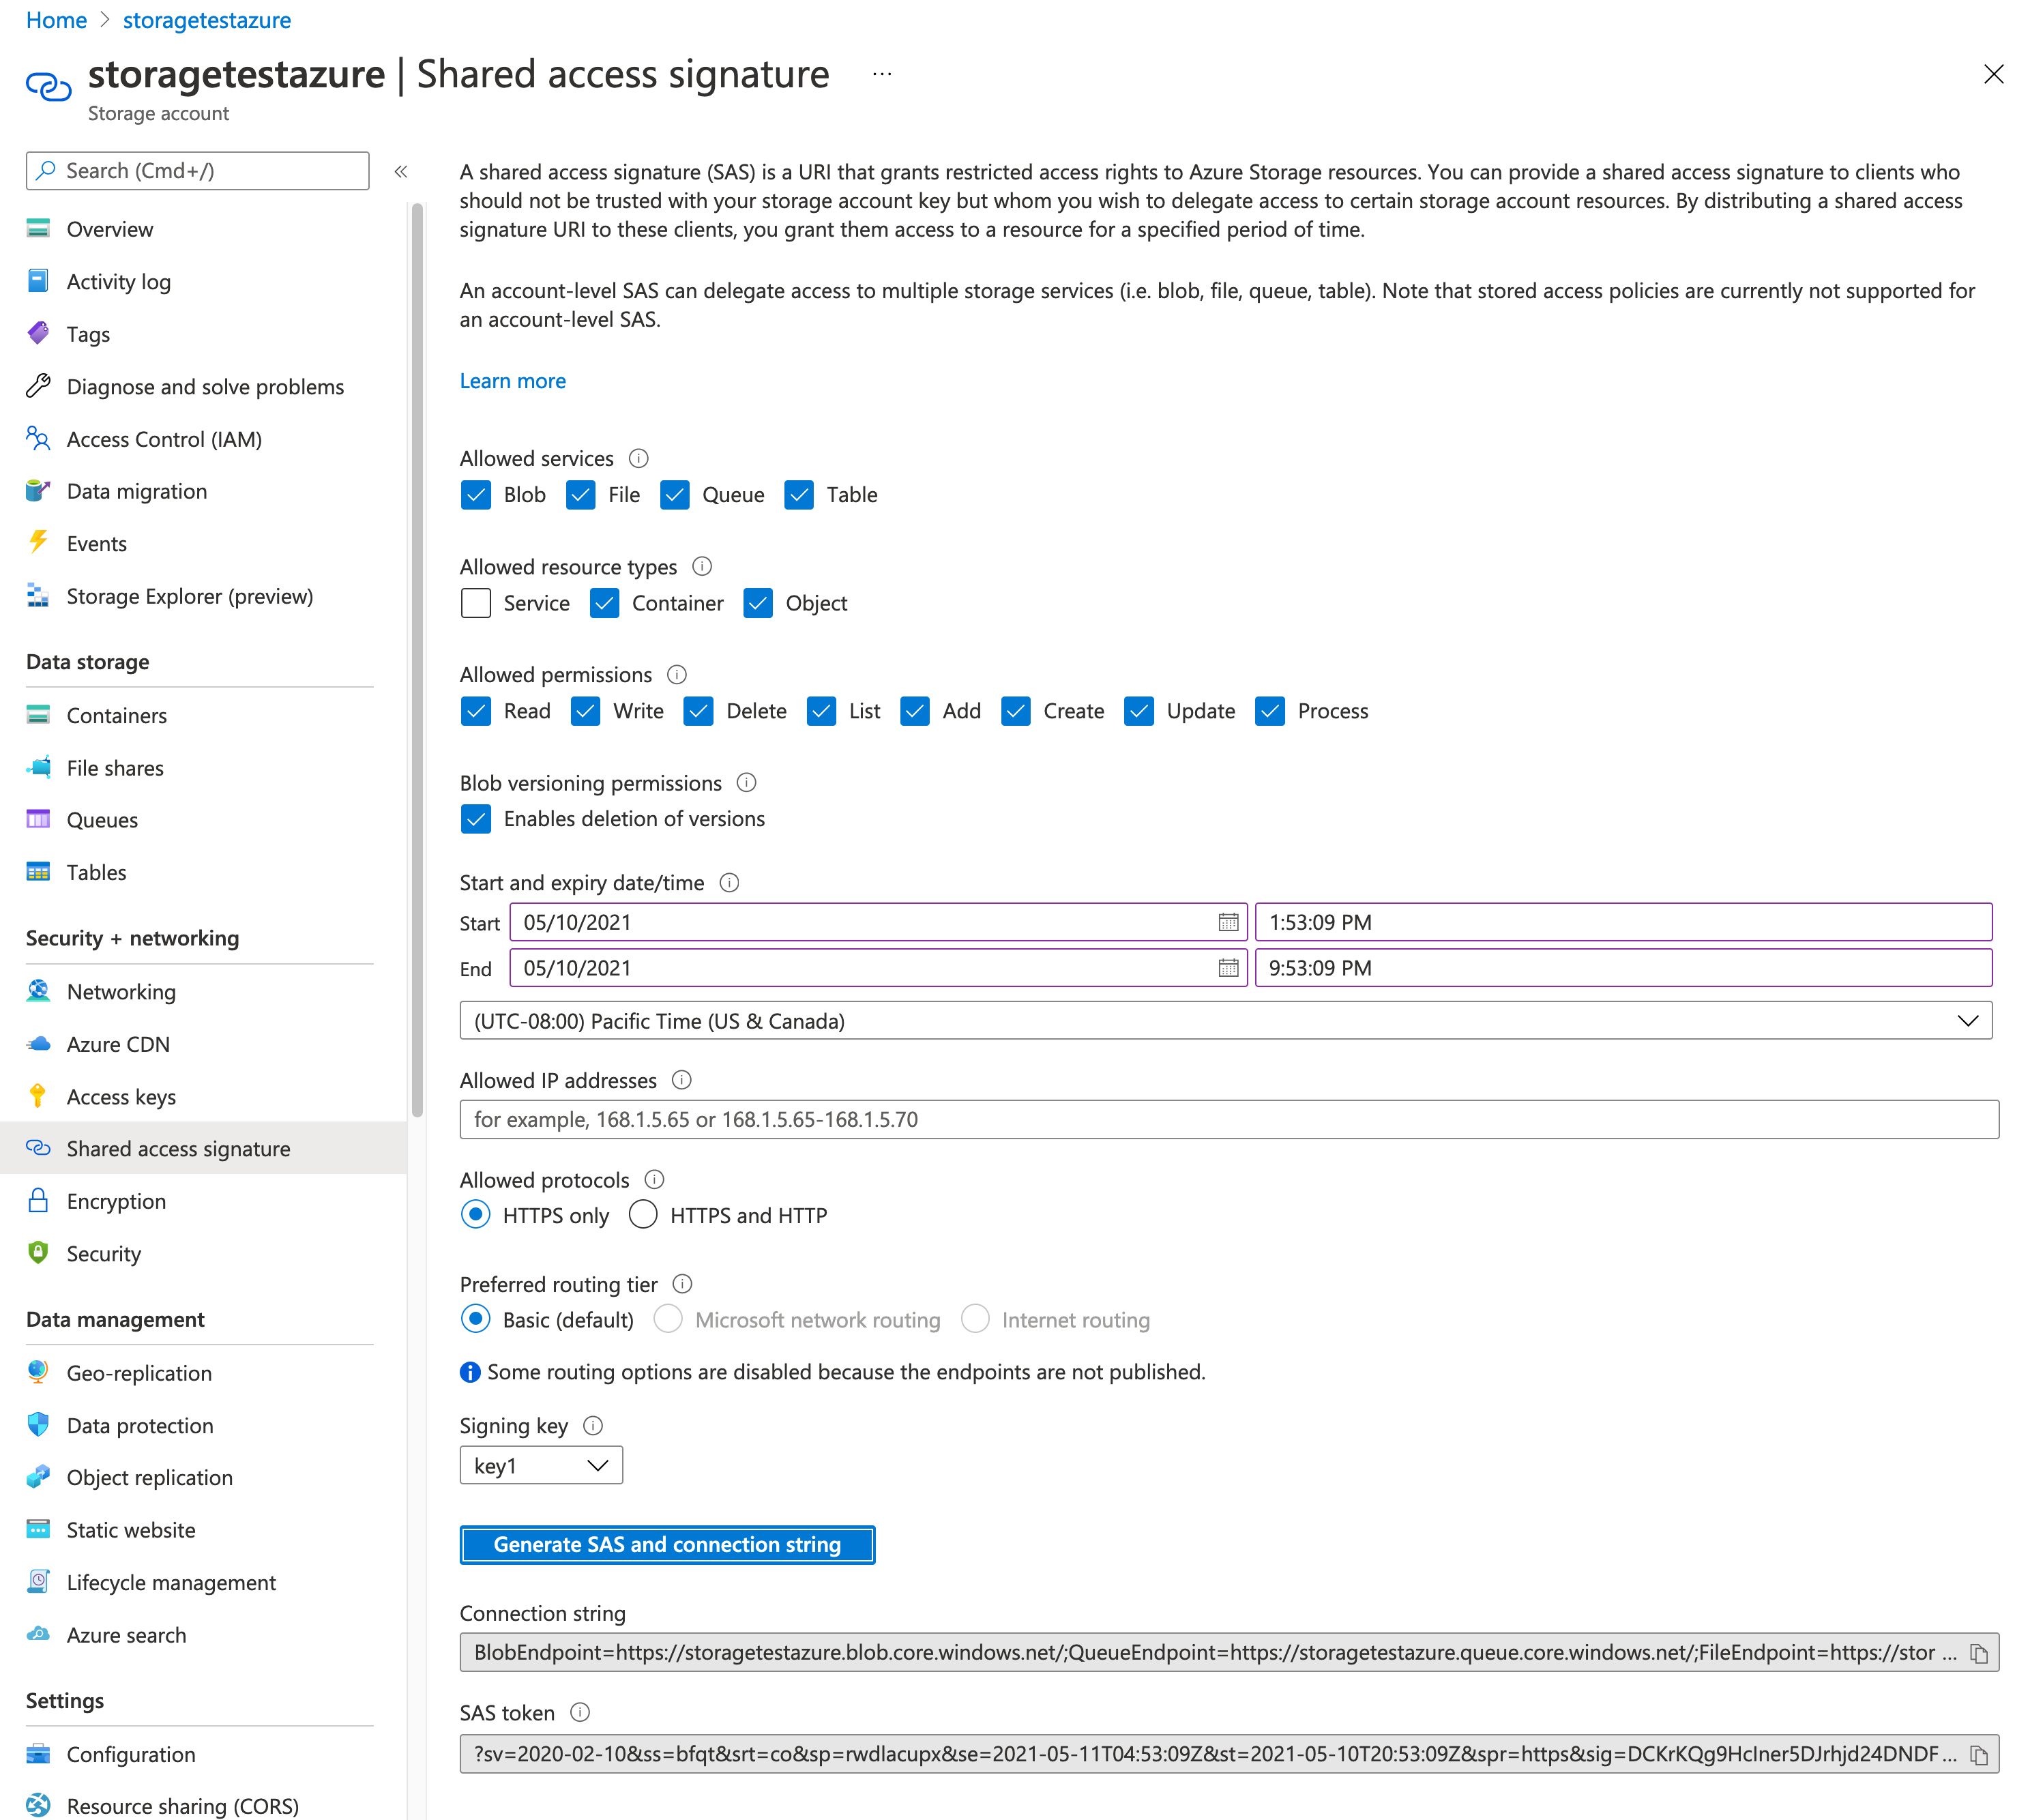 Azure Shared Access Signature page